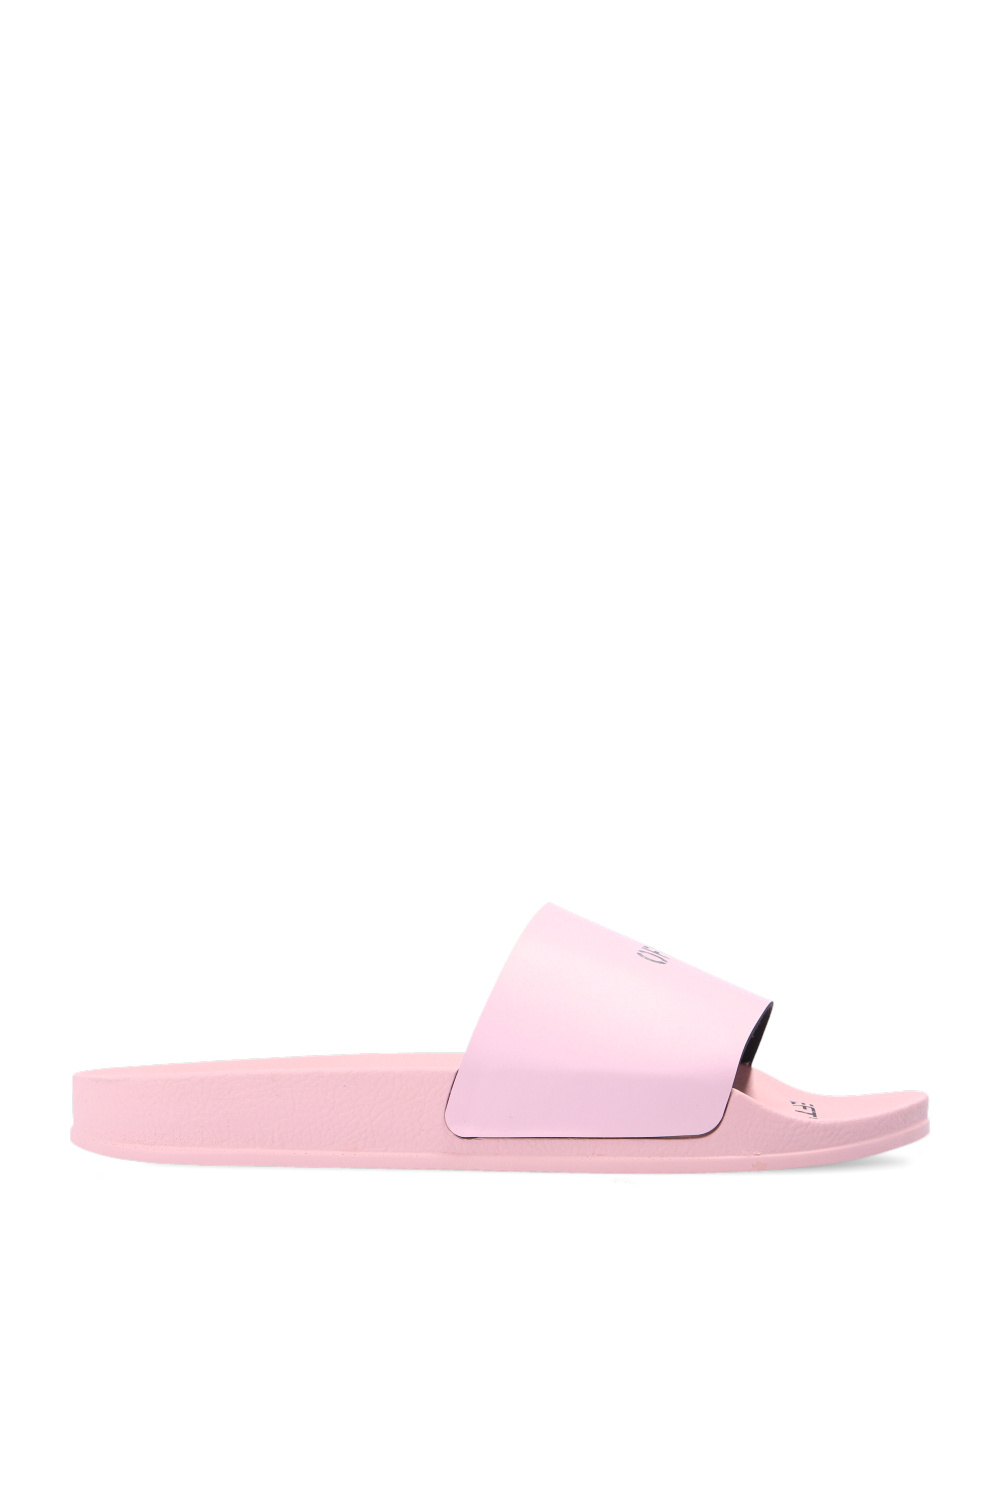 Off-White Rubber slides with logo | Women's Shoes | Vitkac